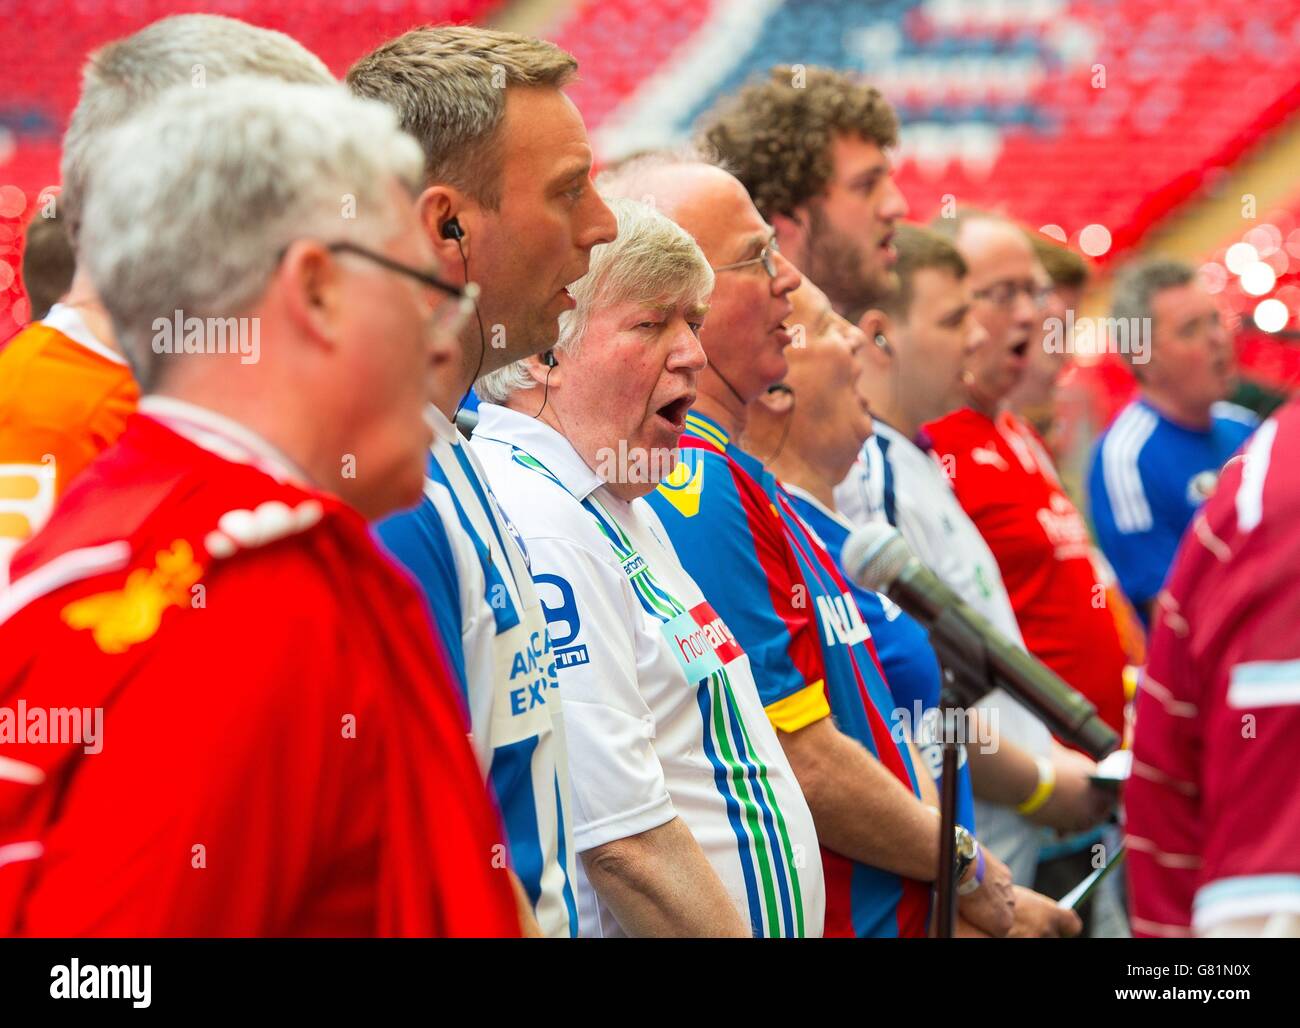 The BBC Songs of Praise FA Cup Fans Choir rehearse at Wembley, ahead of singing Abide with Me at the FA Cup Final on Saturday May 30, which will be broadcast on BBC 1 from 1555. Stock Photo